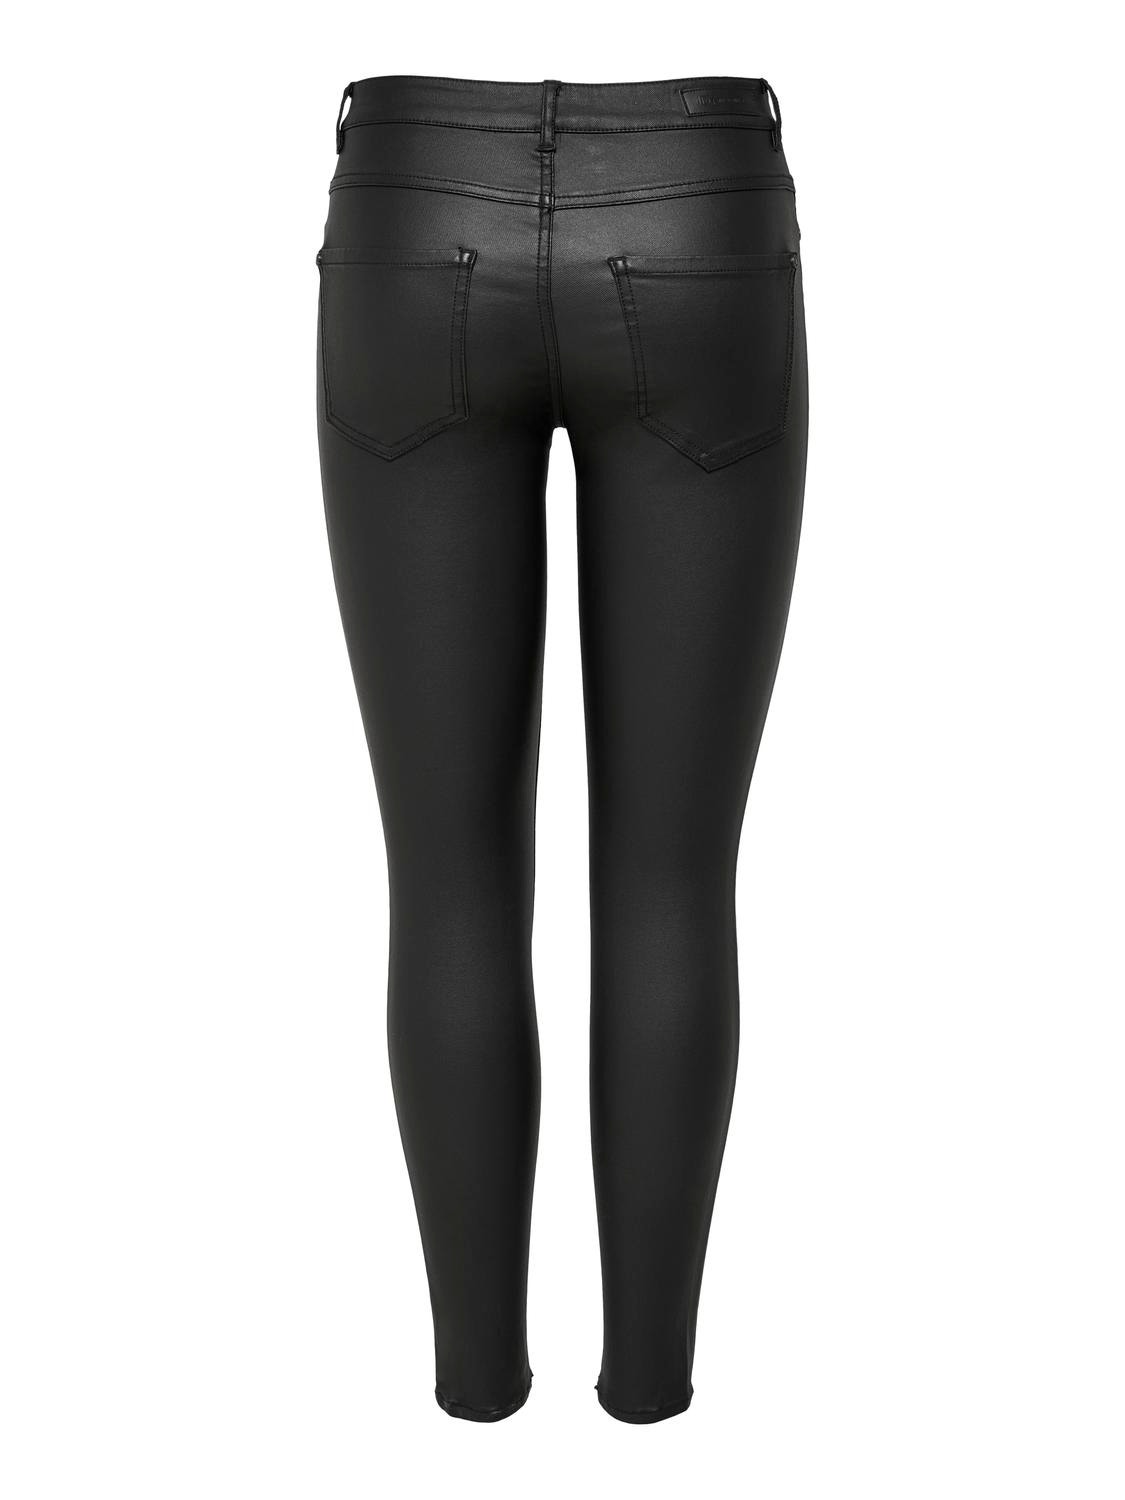 ONLY Trousers with mid waist -Black - 15211788